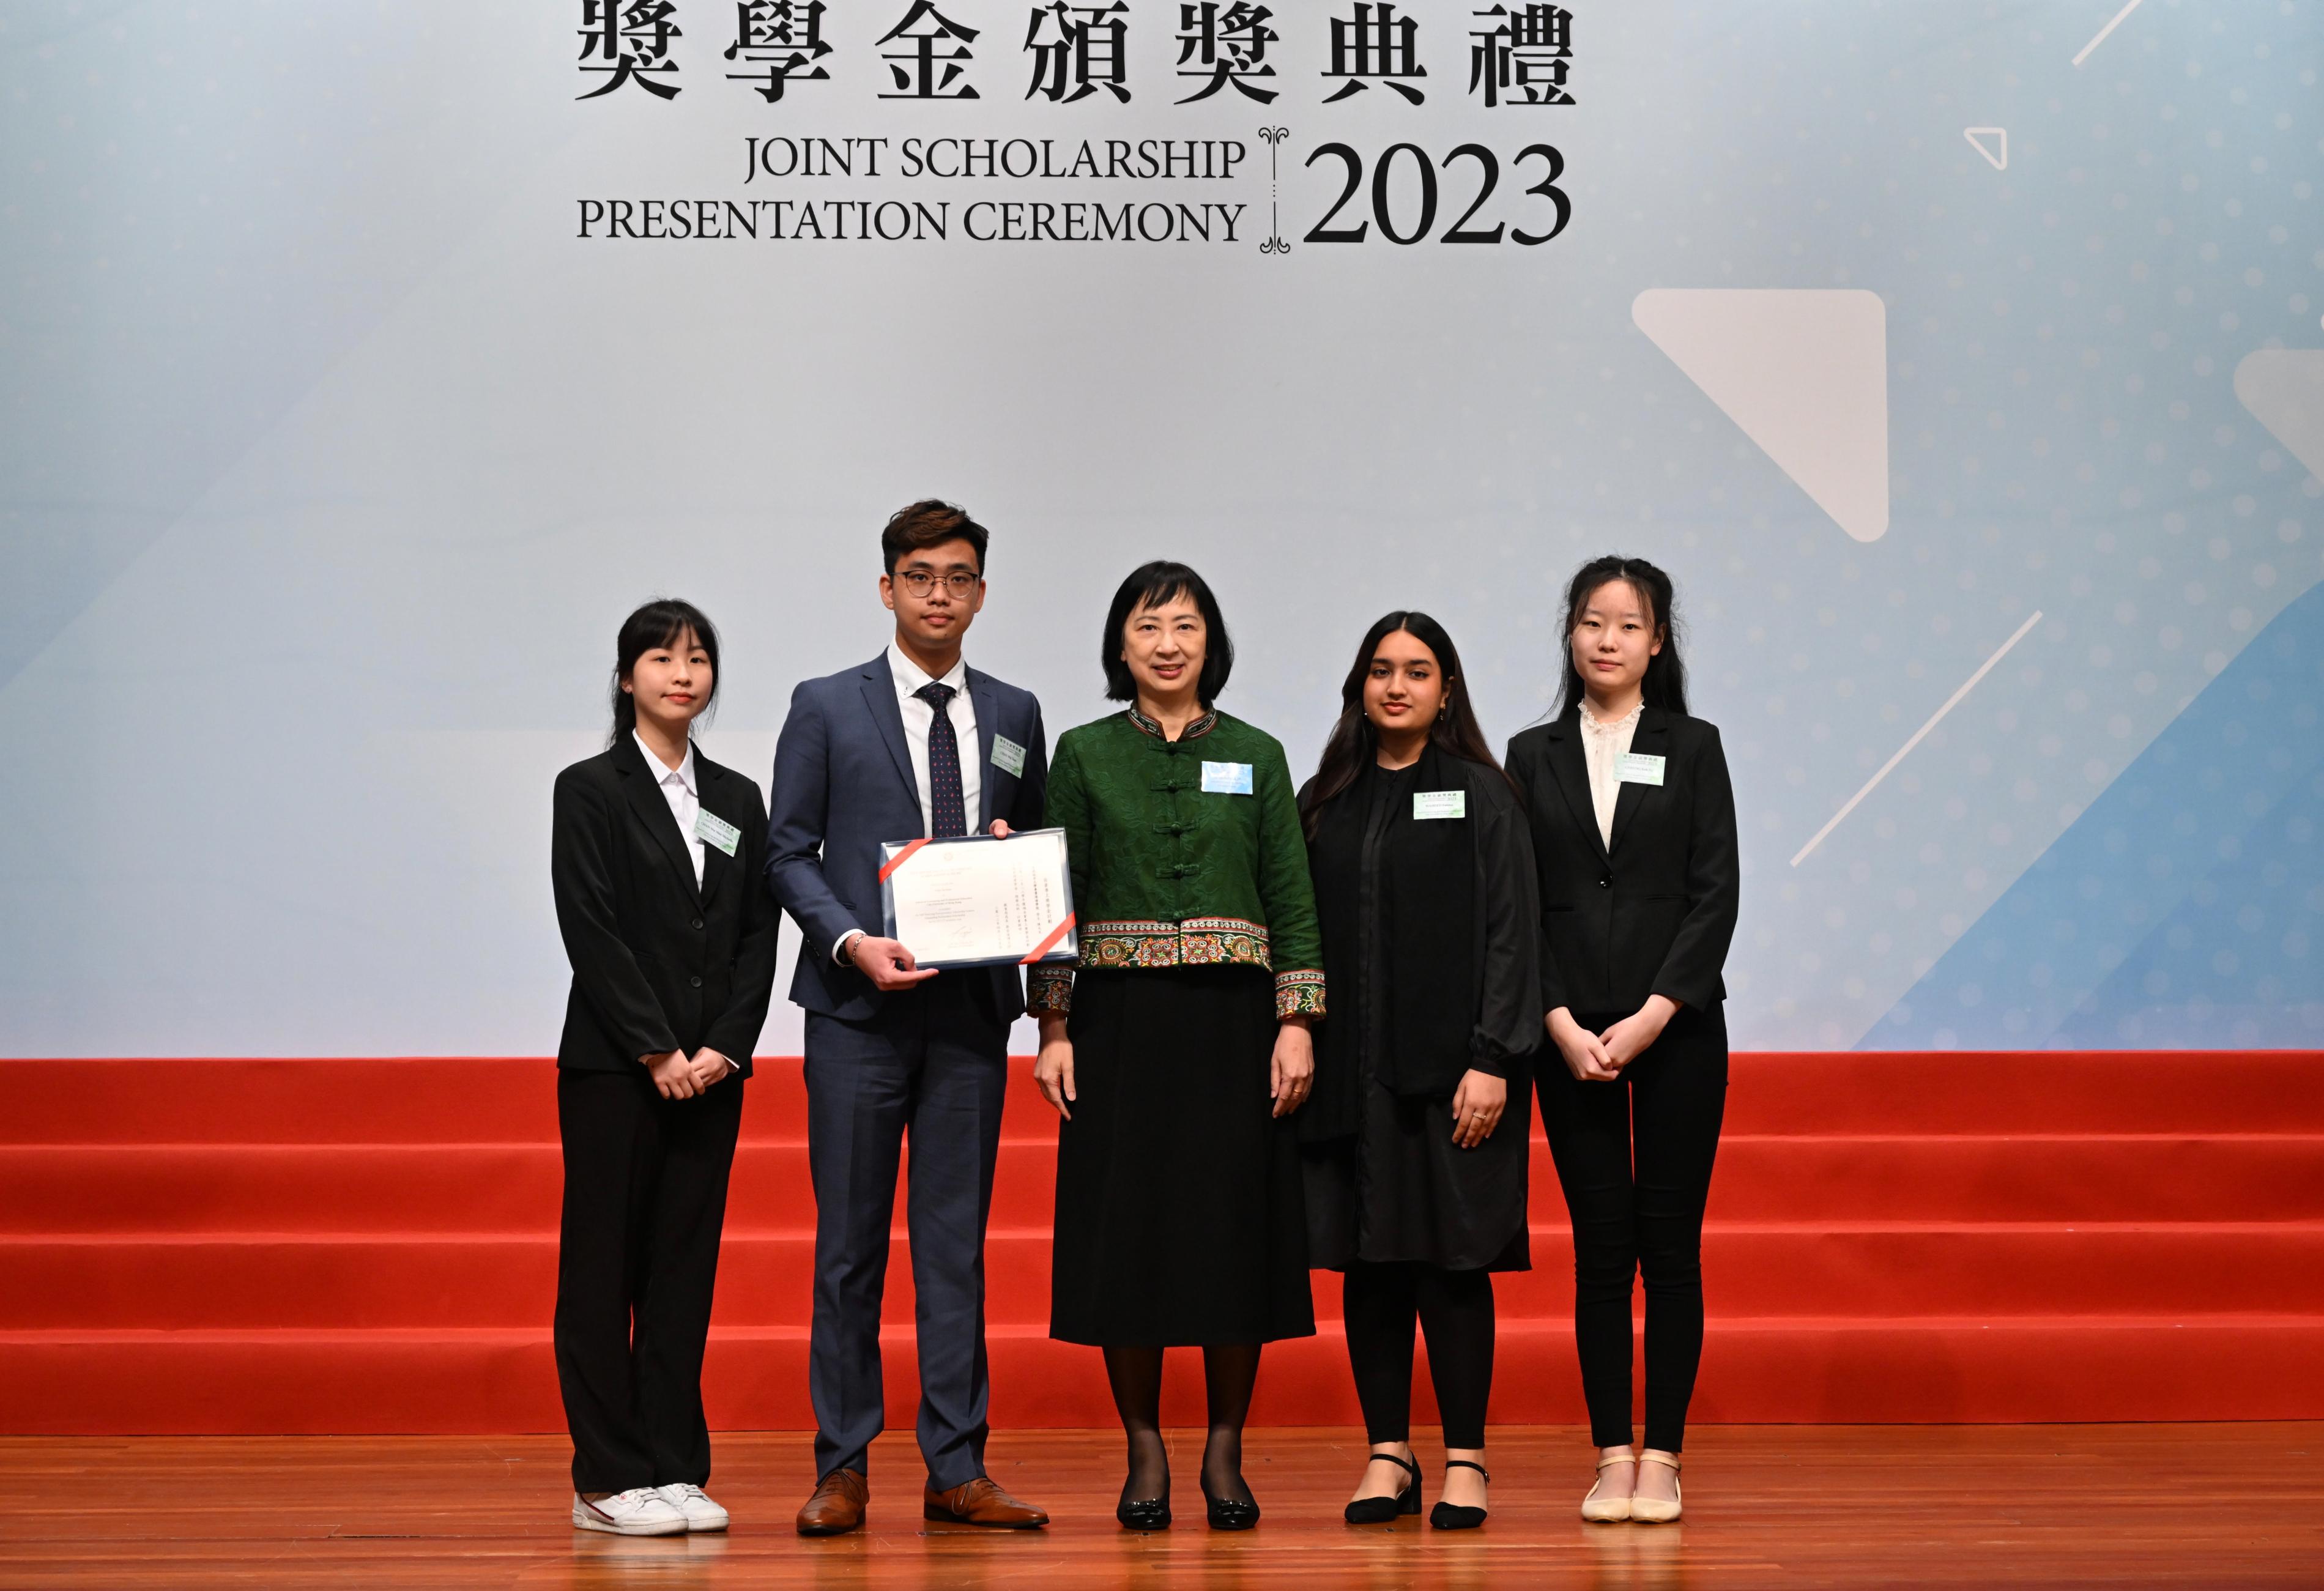 The Education Bureau held the HKSAR Government Scholarship Fund and Self-financing Post-secondary Education Fund Joint Scholarship Presentation Ceremony today (April 25). Photo shows the Permanent Secretary for Education, Ms Michelle Li (centre), presenting a certificate to students who are awarded scholarships under the Self-financing Post-secondary Education Fund.